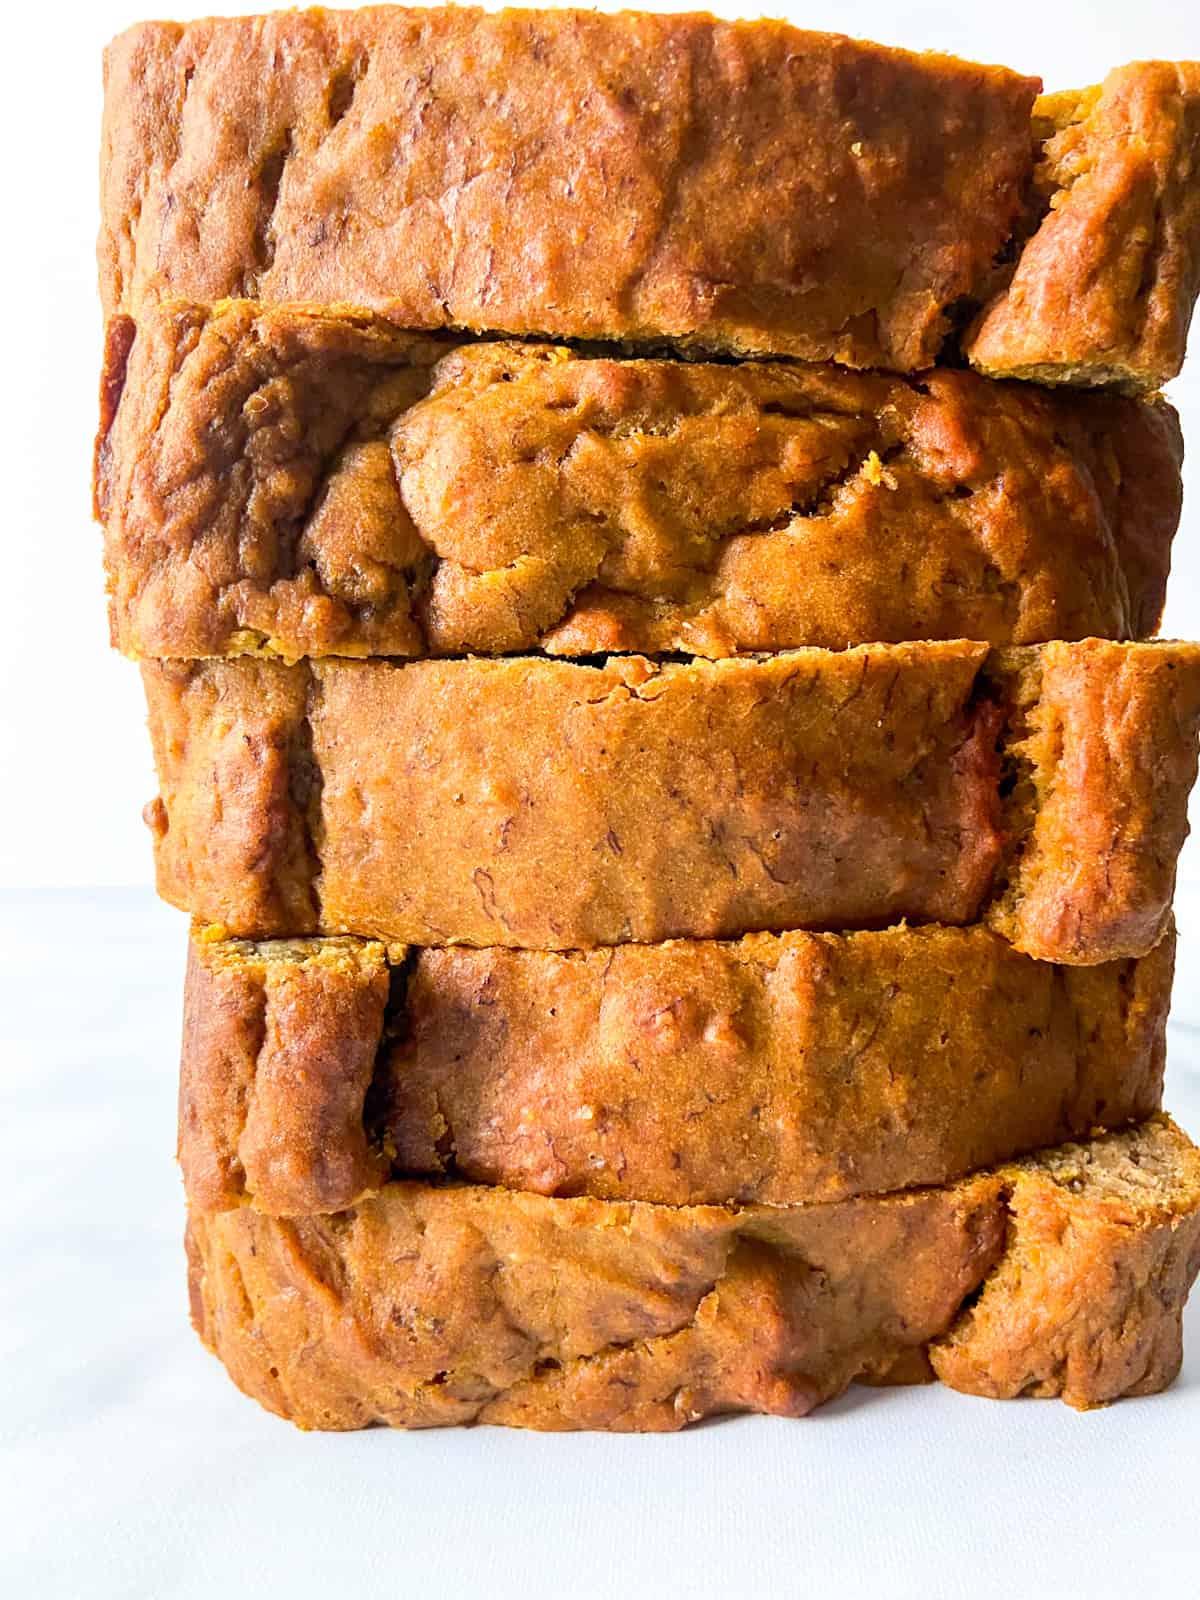 A stack of pumpkin bread slices.